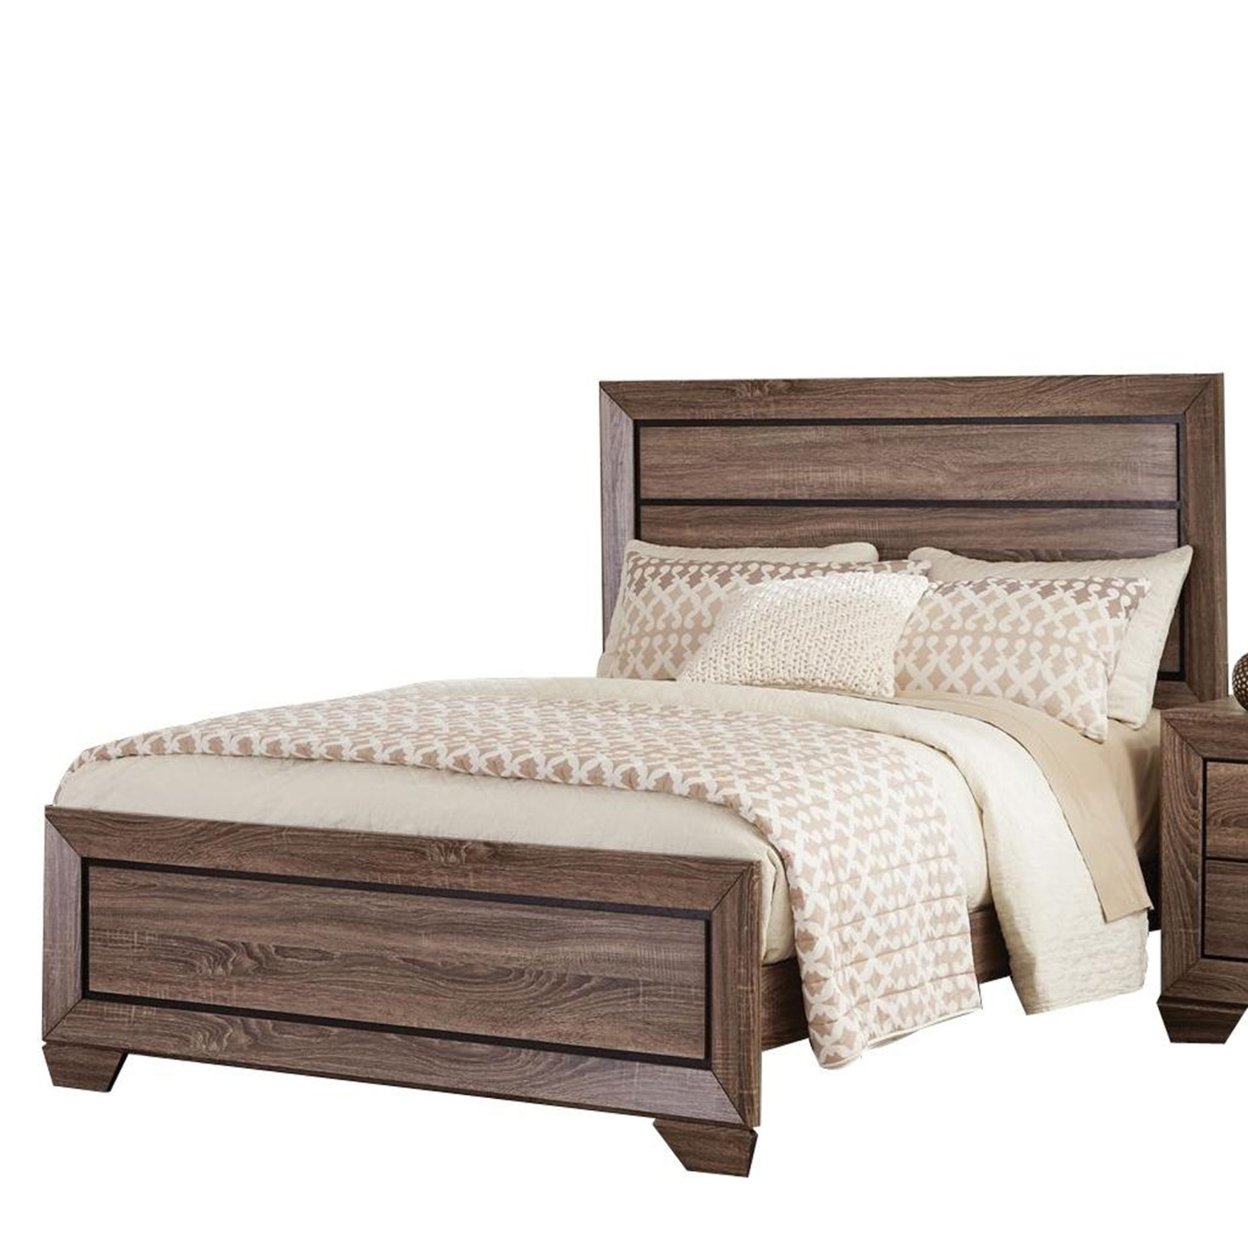 Transitional Style California King Bed With Plank Headboard, Taupe Brown- Saltoro Sherpi